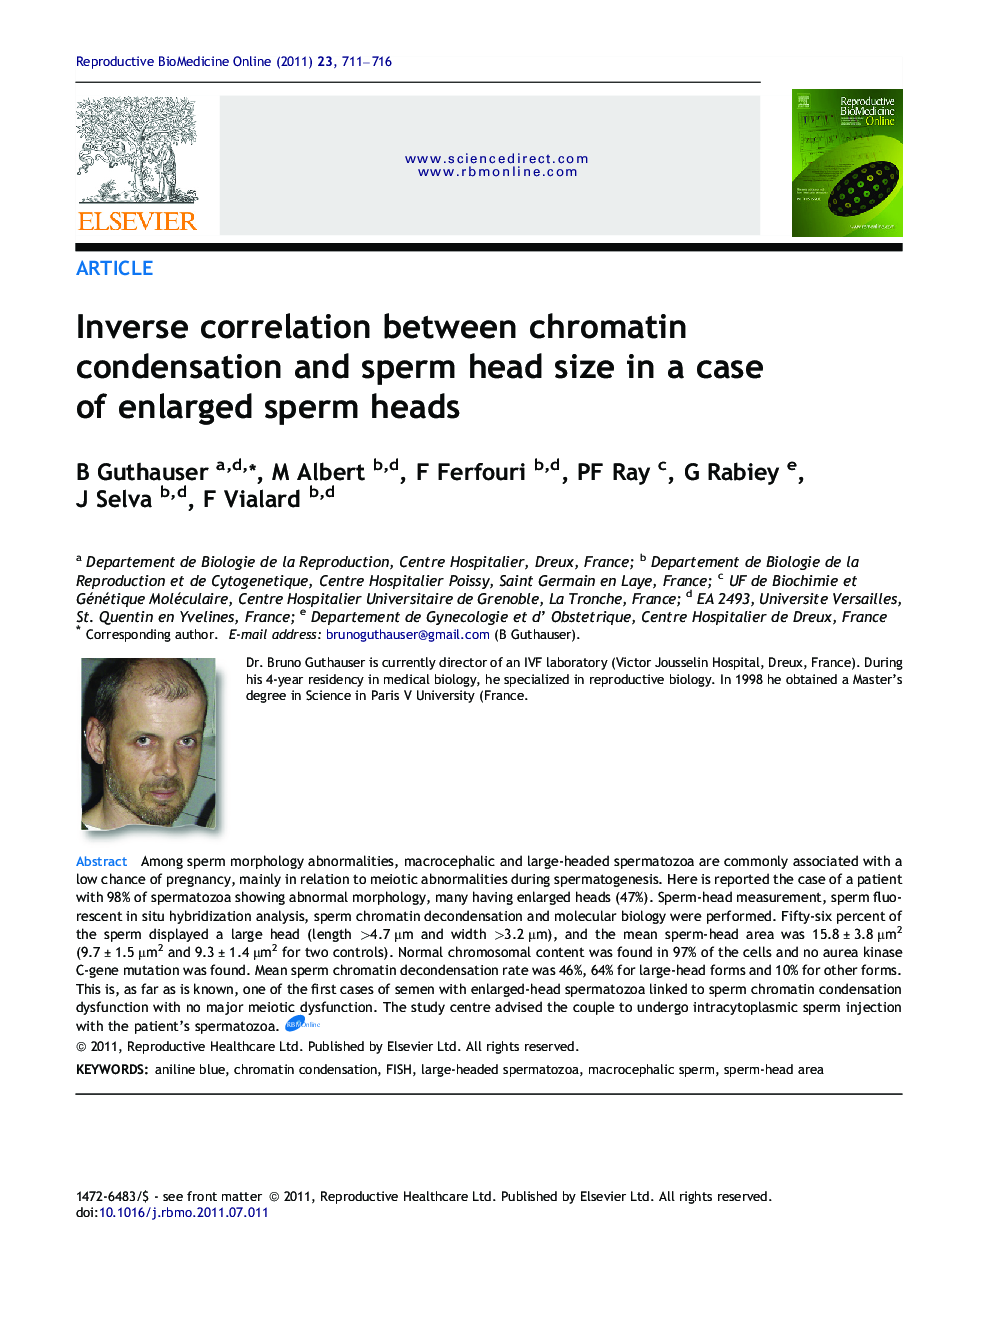 Inverse correlation between chromatin condensation and sperm head size in a case of enlarged sperm heads 